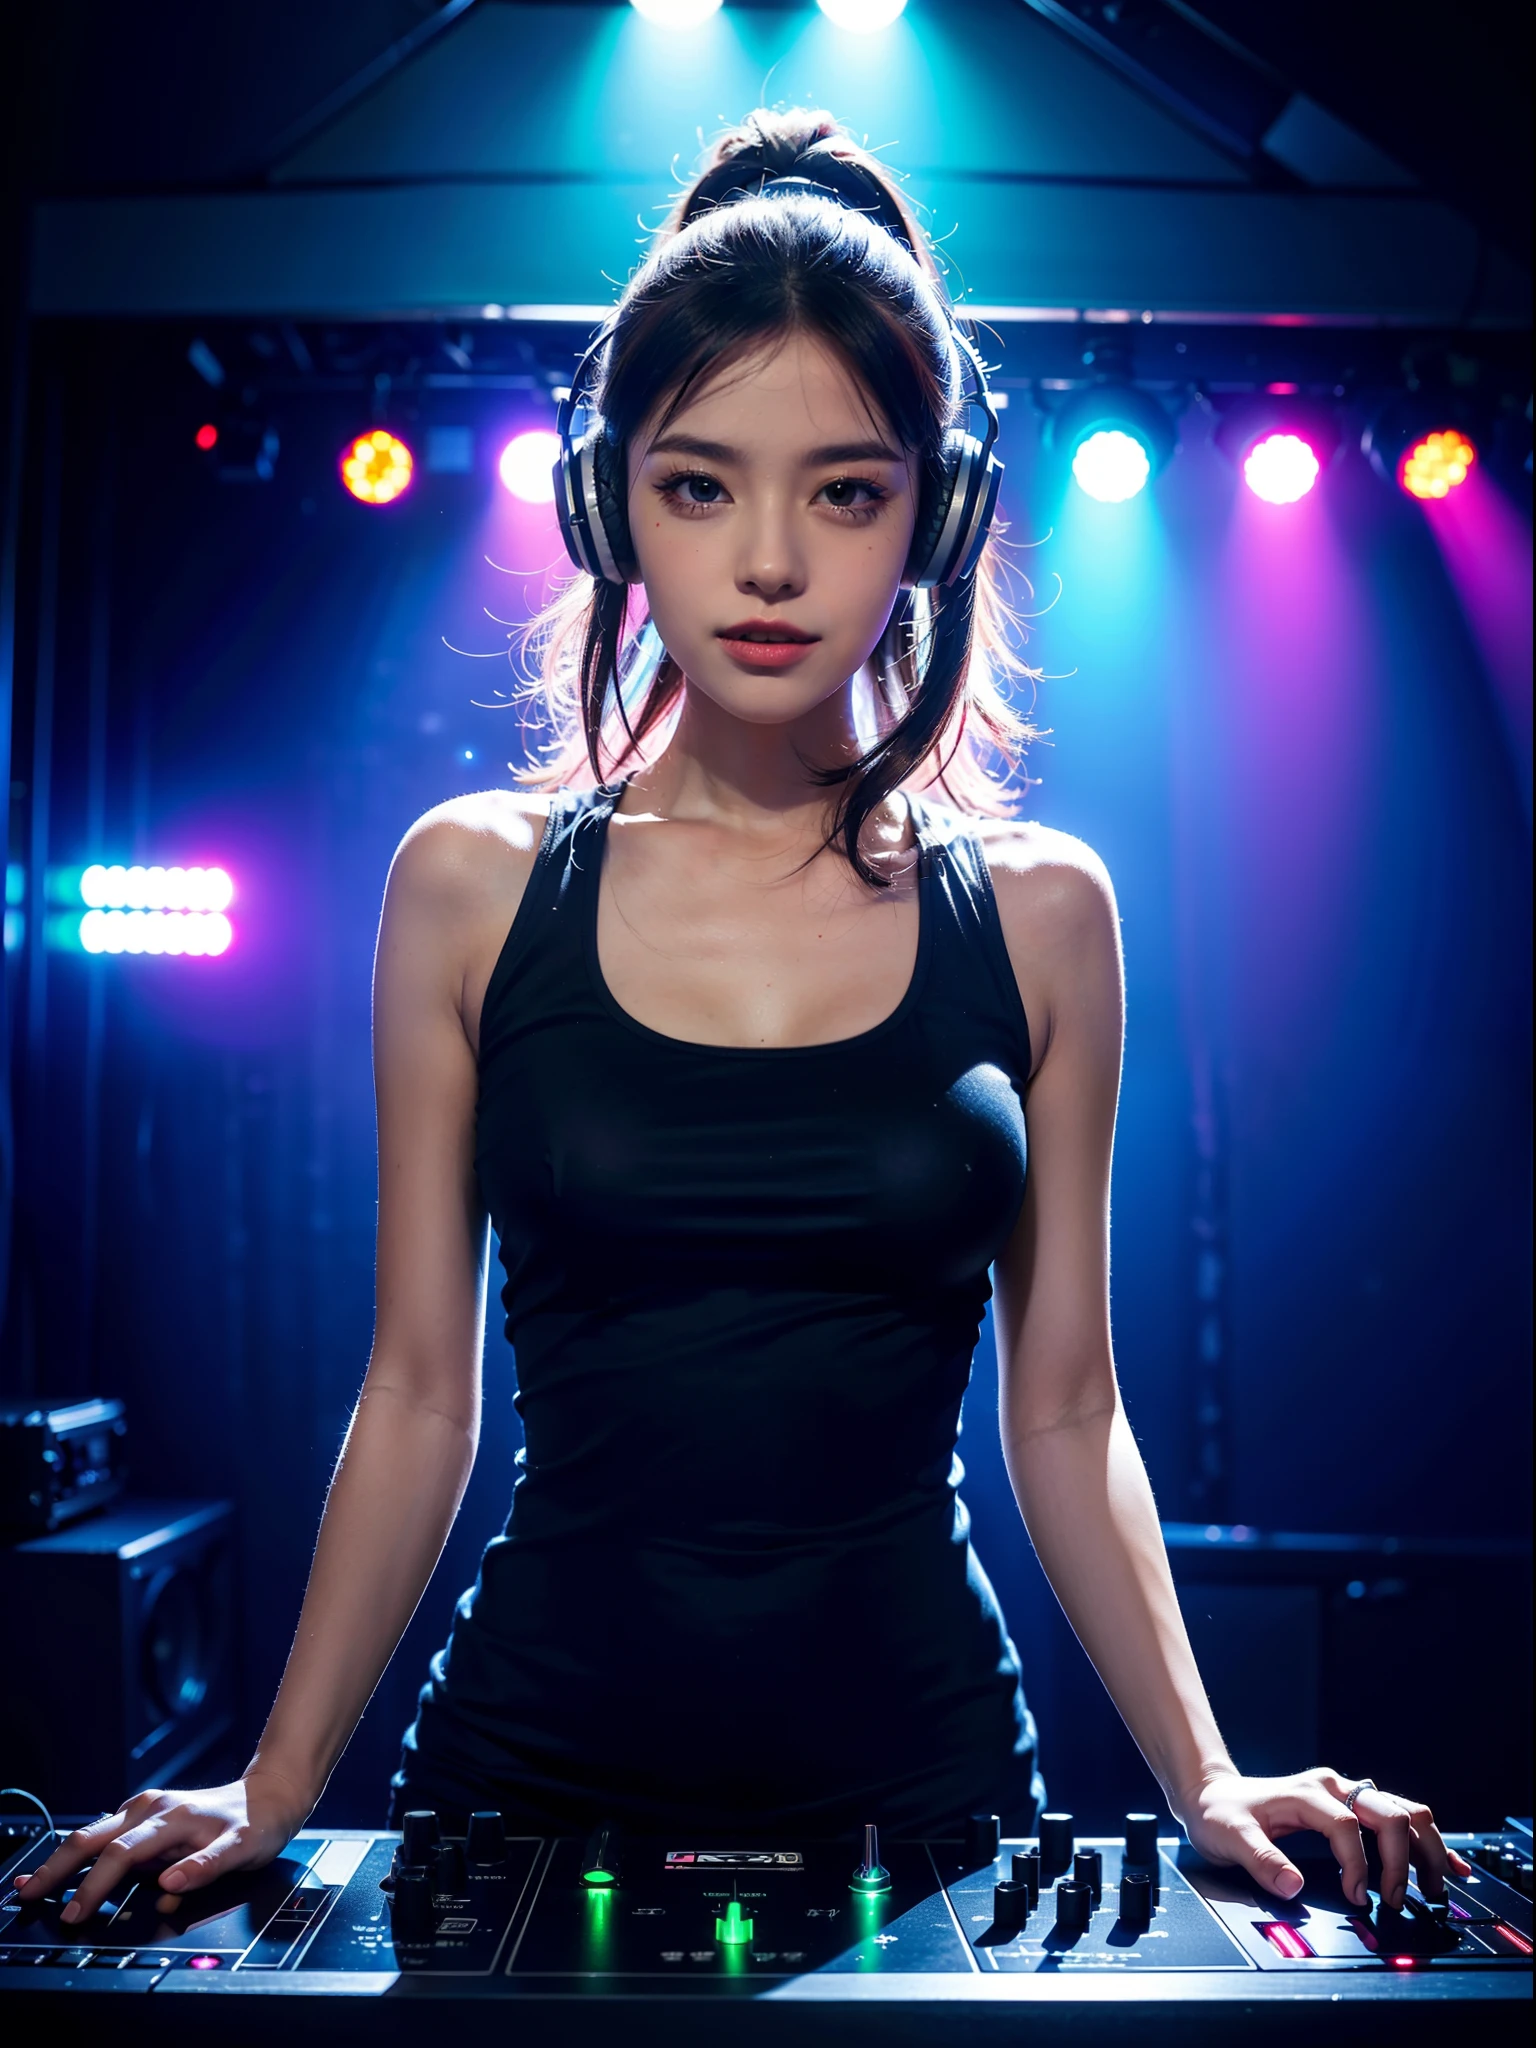 (best quality,4k,8k,highres,masterpiece:1.2),ultra-detailed,(realistic,photorealistic,photo-realistic:1.37),A girl DJ with musical instruments,vibrant colors,studio lighting,bokeh,detailed face expression,dynamic pose,futuristic headphones,energetic dance floor,professional equipment,electric atmosphere,dancing crowd,strobing lights in the background,shining stage,sparkling disco ball,playful and lively mood,smoke machine,superb sound system,laser effects,jumping bass,electronic beats,clubbing theme,vivid colors,neon lights.